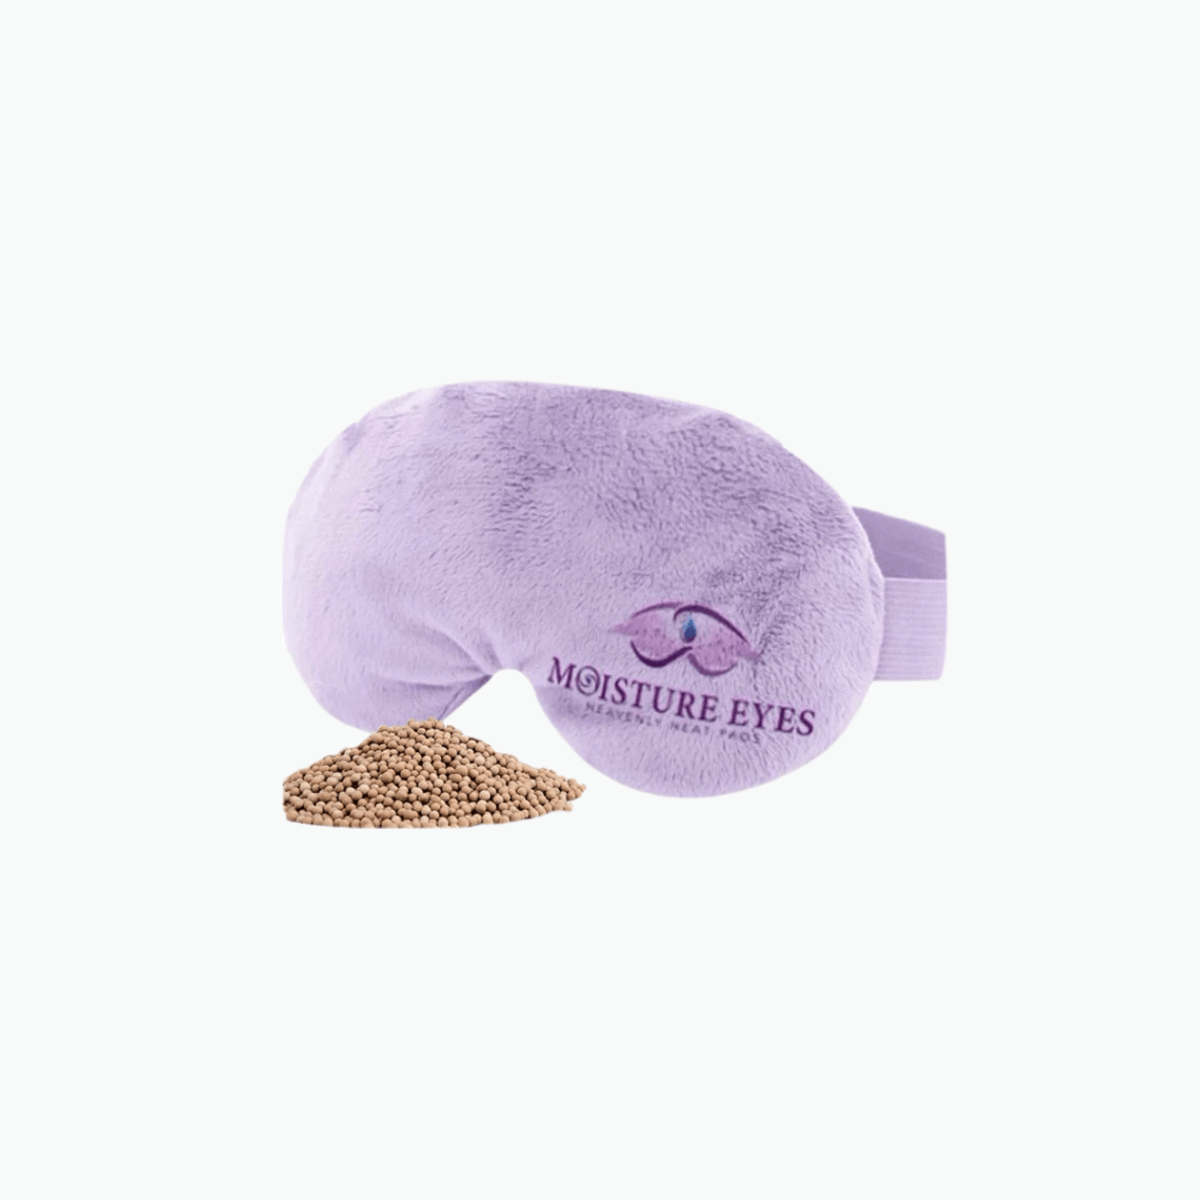 Moisture Eyes Heavenly Heat Pads with Natural Clay Beads for Dry Eye Relief (1 Mask) - Dryeye Rescue